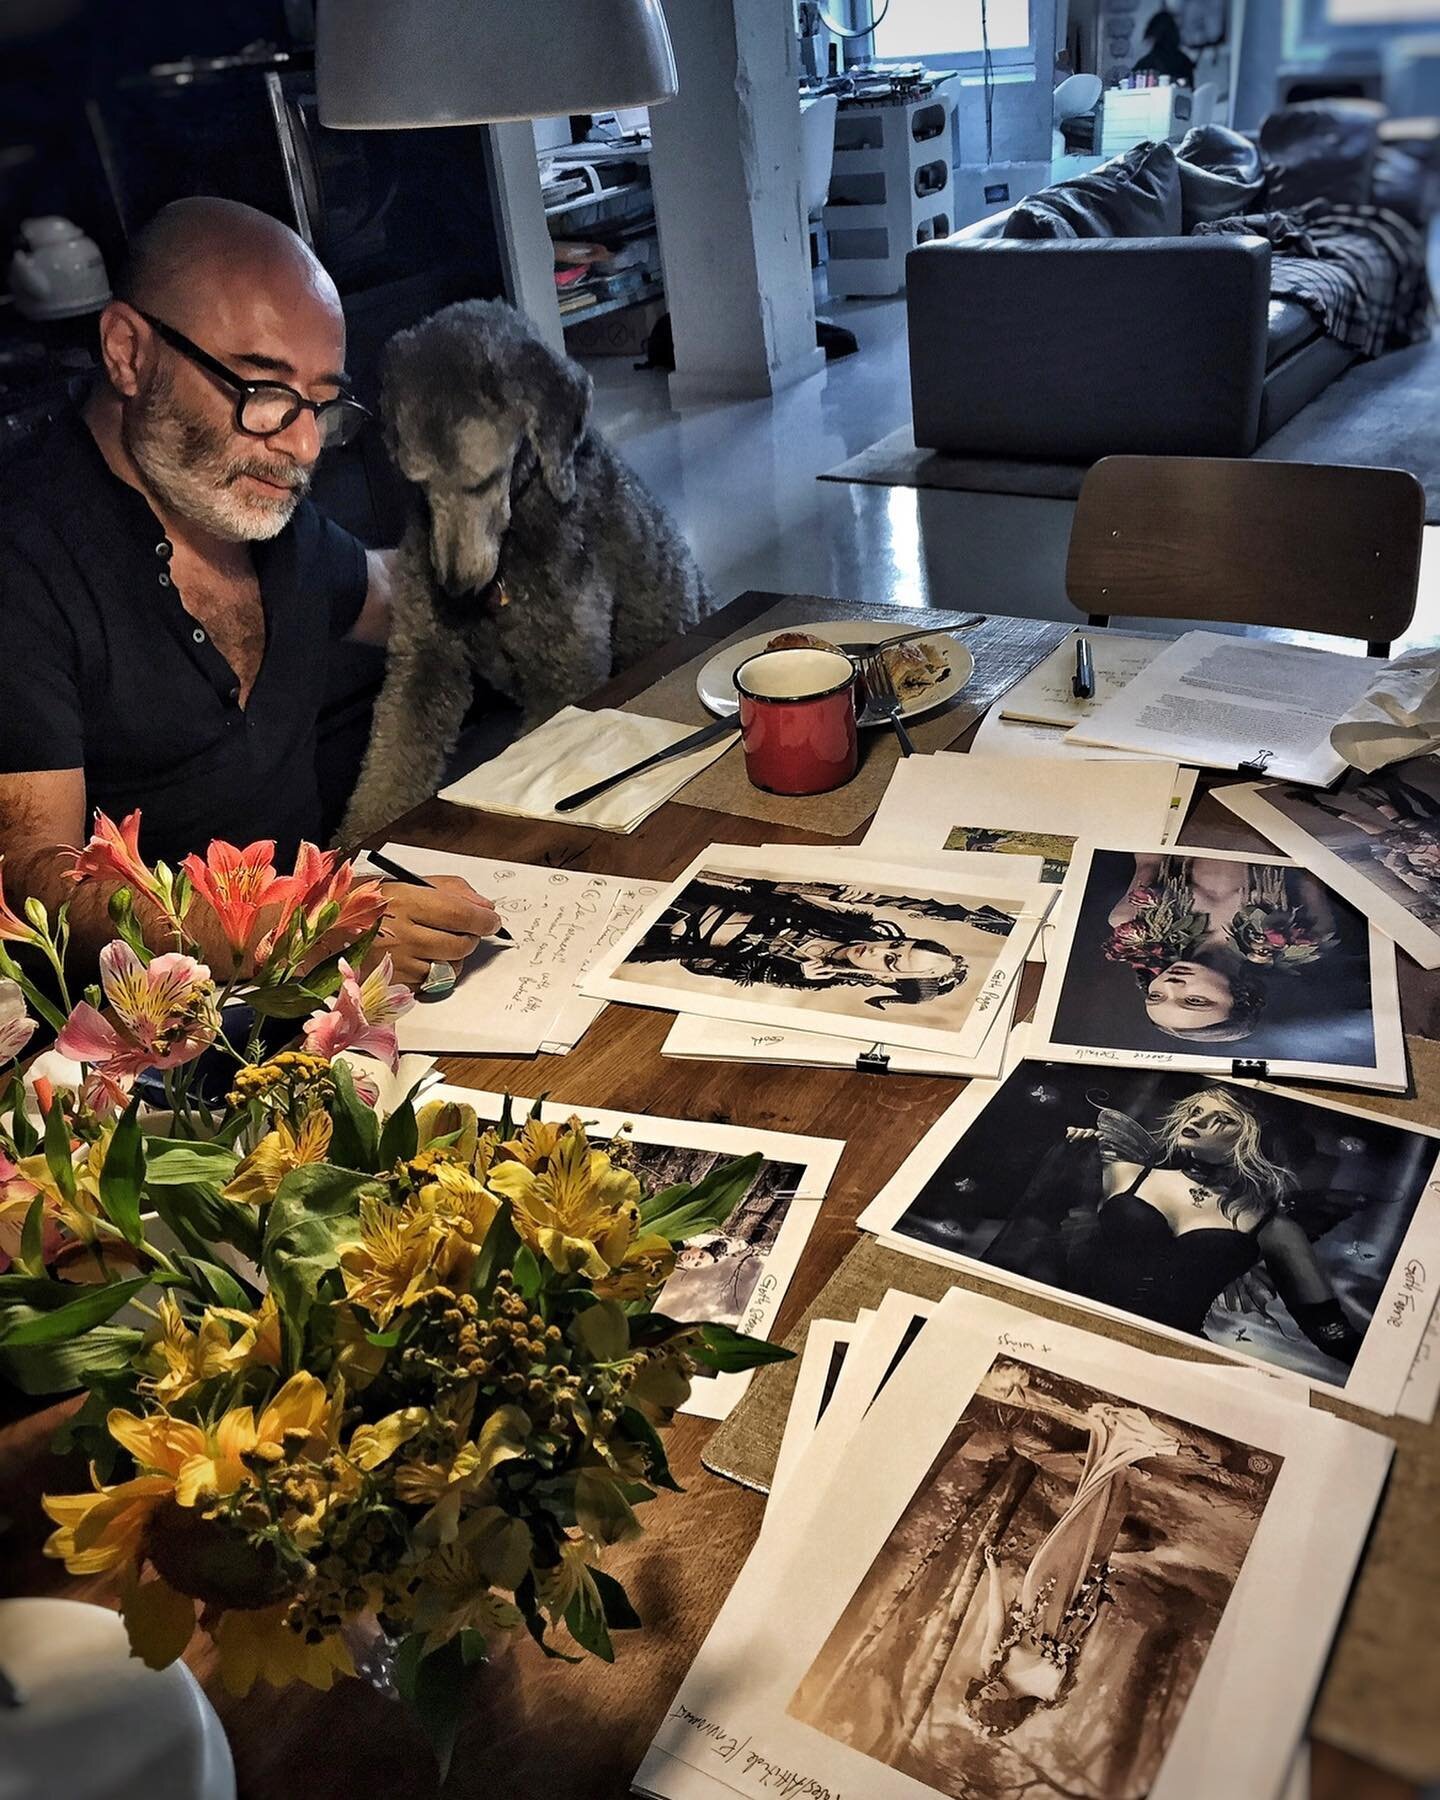 Manifesto artist @izakzenou_illustrationist (with inspirational images) sketching while Wooly looks on. From our archives.